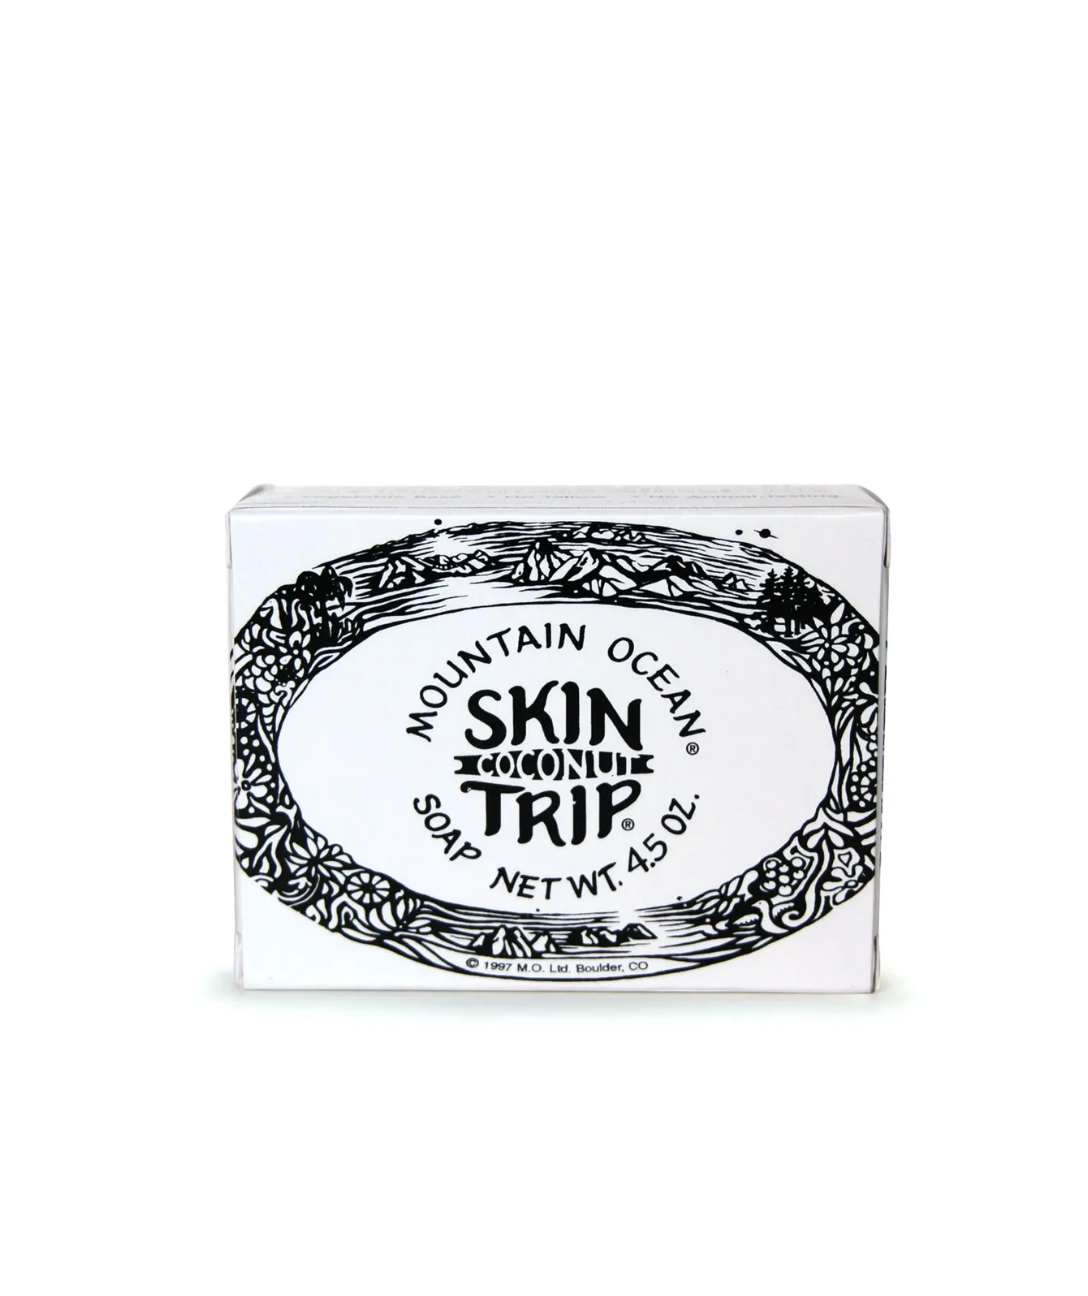 A box of Faire Skin Trip Soap 4.5oz with a black and white floral design around the text, displayed in a Scottsdale Arizona bungalow, on a white background.